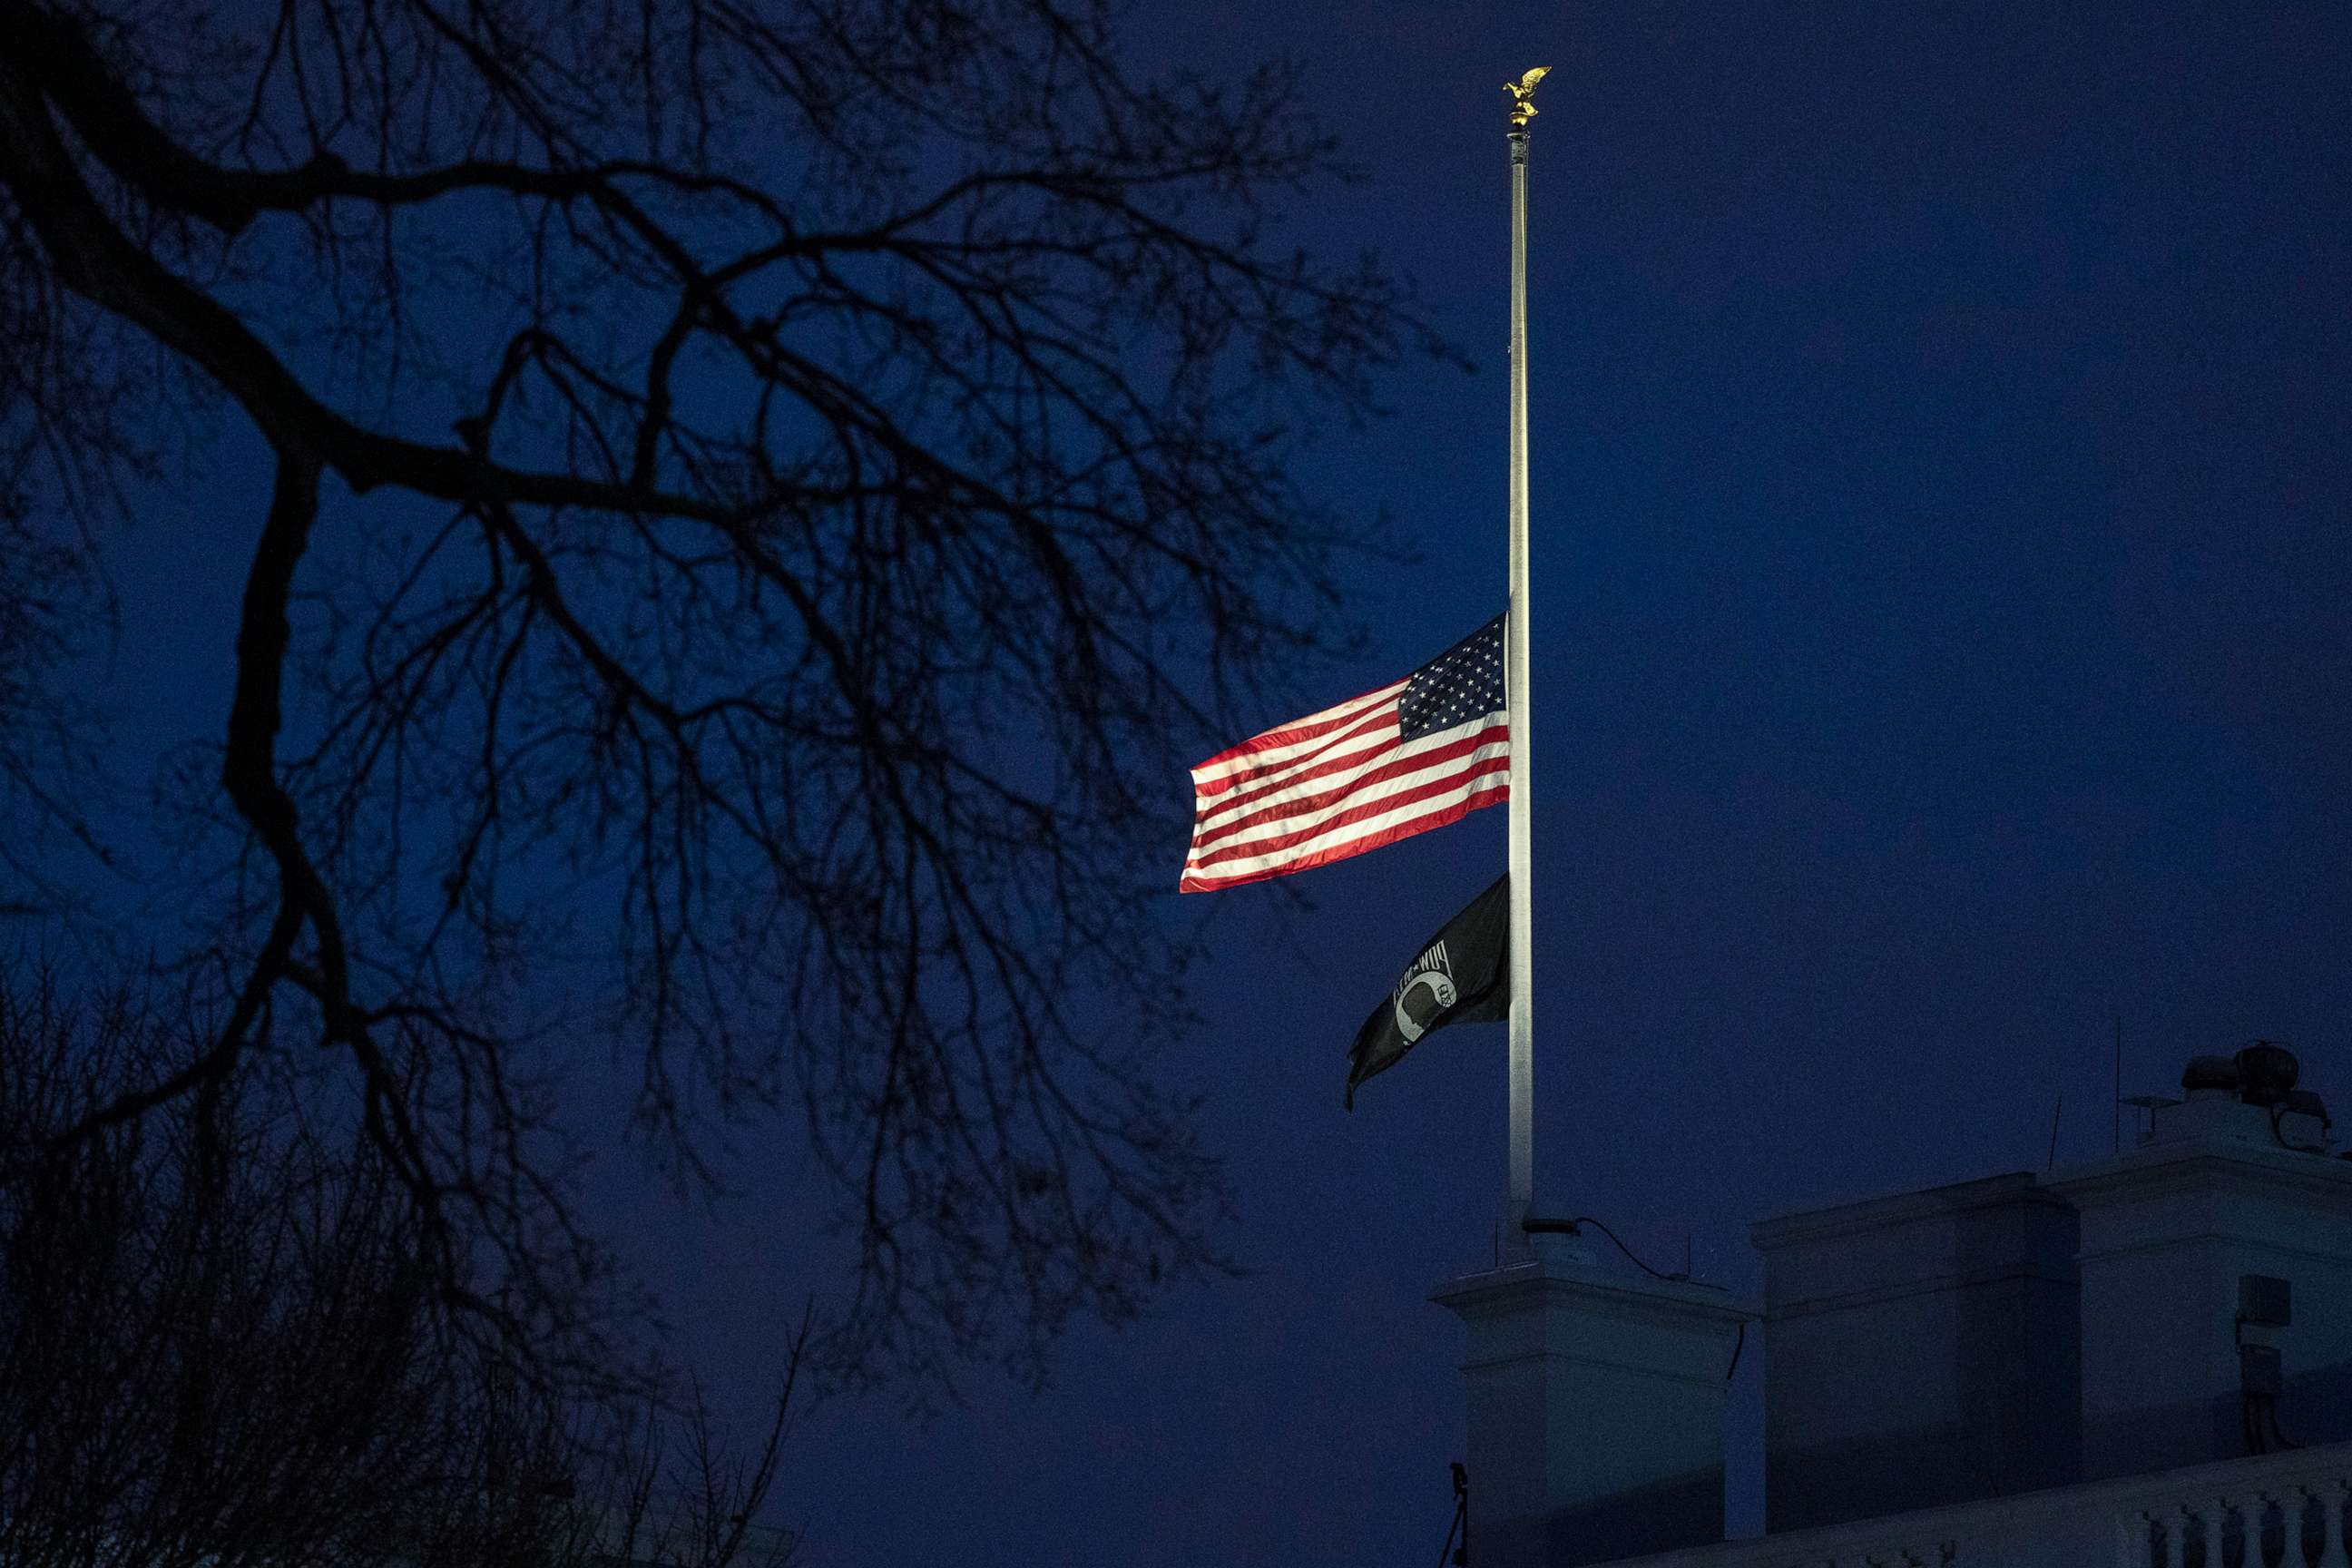 PHOTO: The American flag flies at half-staff on Jan. 23, 2023, at the White House as a mark of respect for the victims of the Los Angeles-area ballroom dance club Lunar New Year massacre on Jan. 21, 2023, in Monterey Park, Calif.